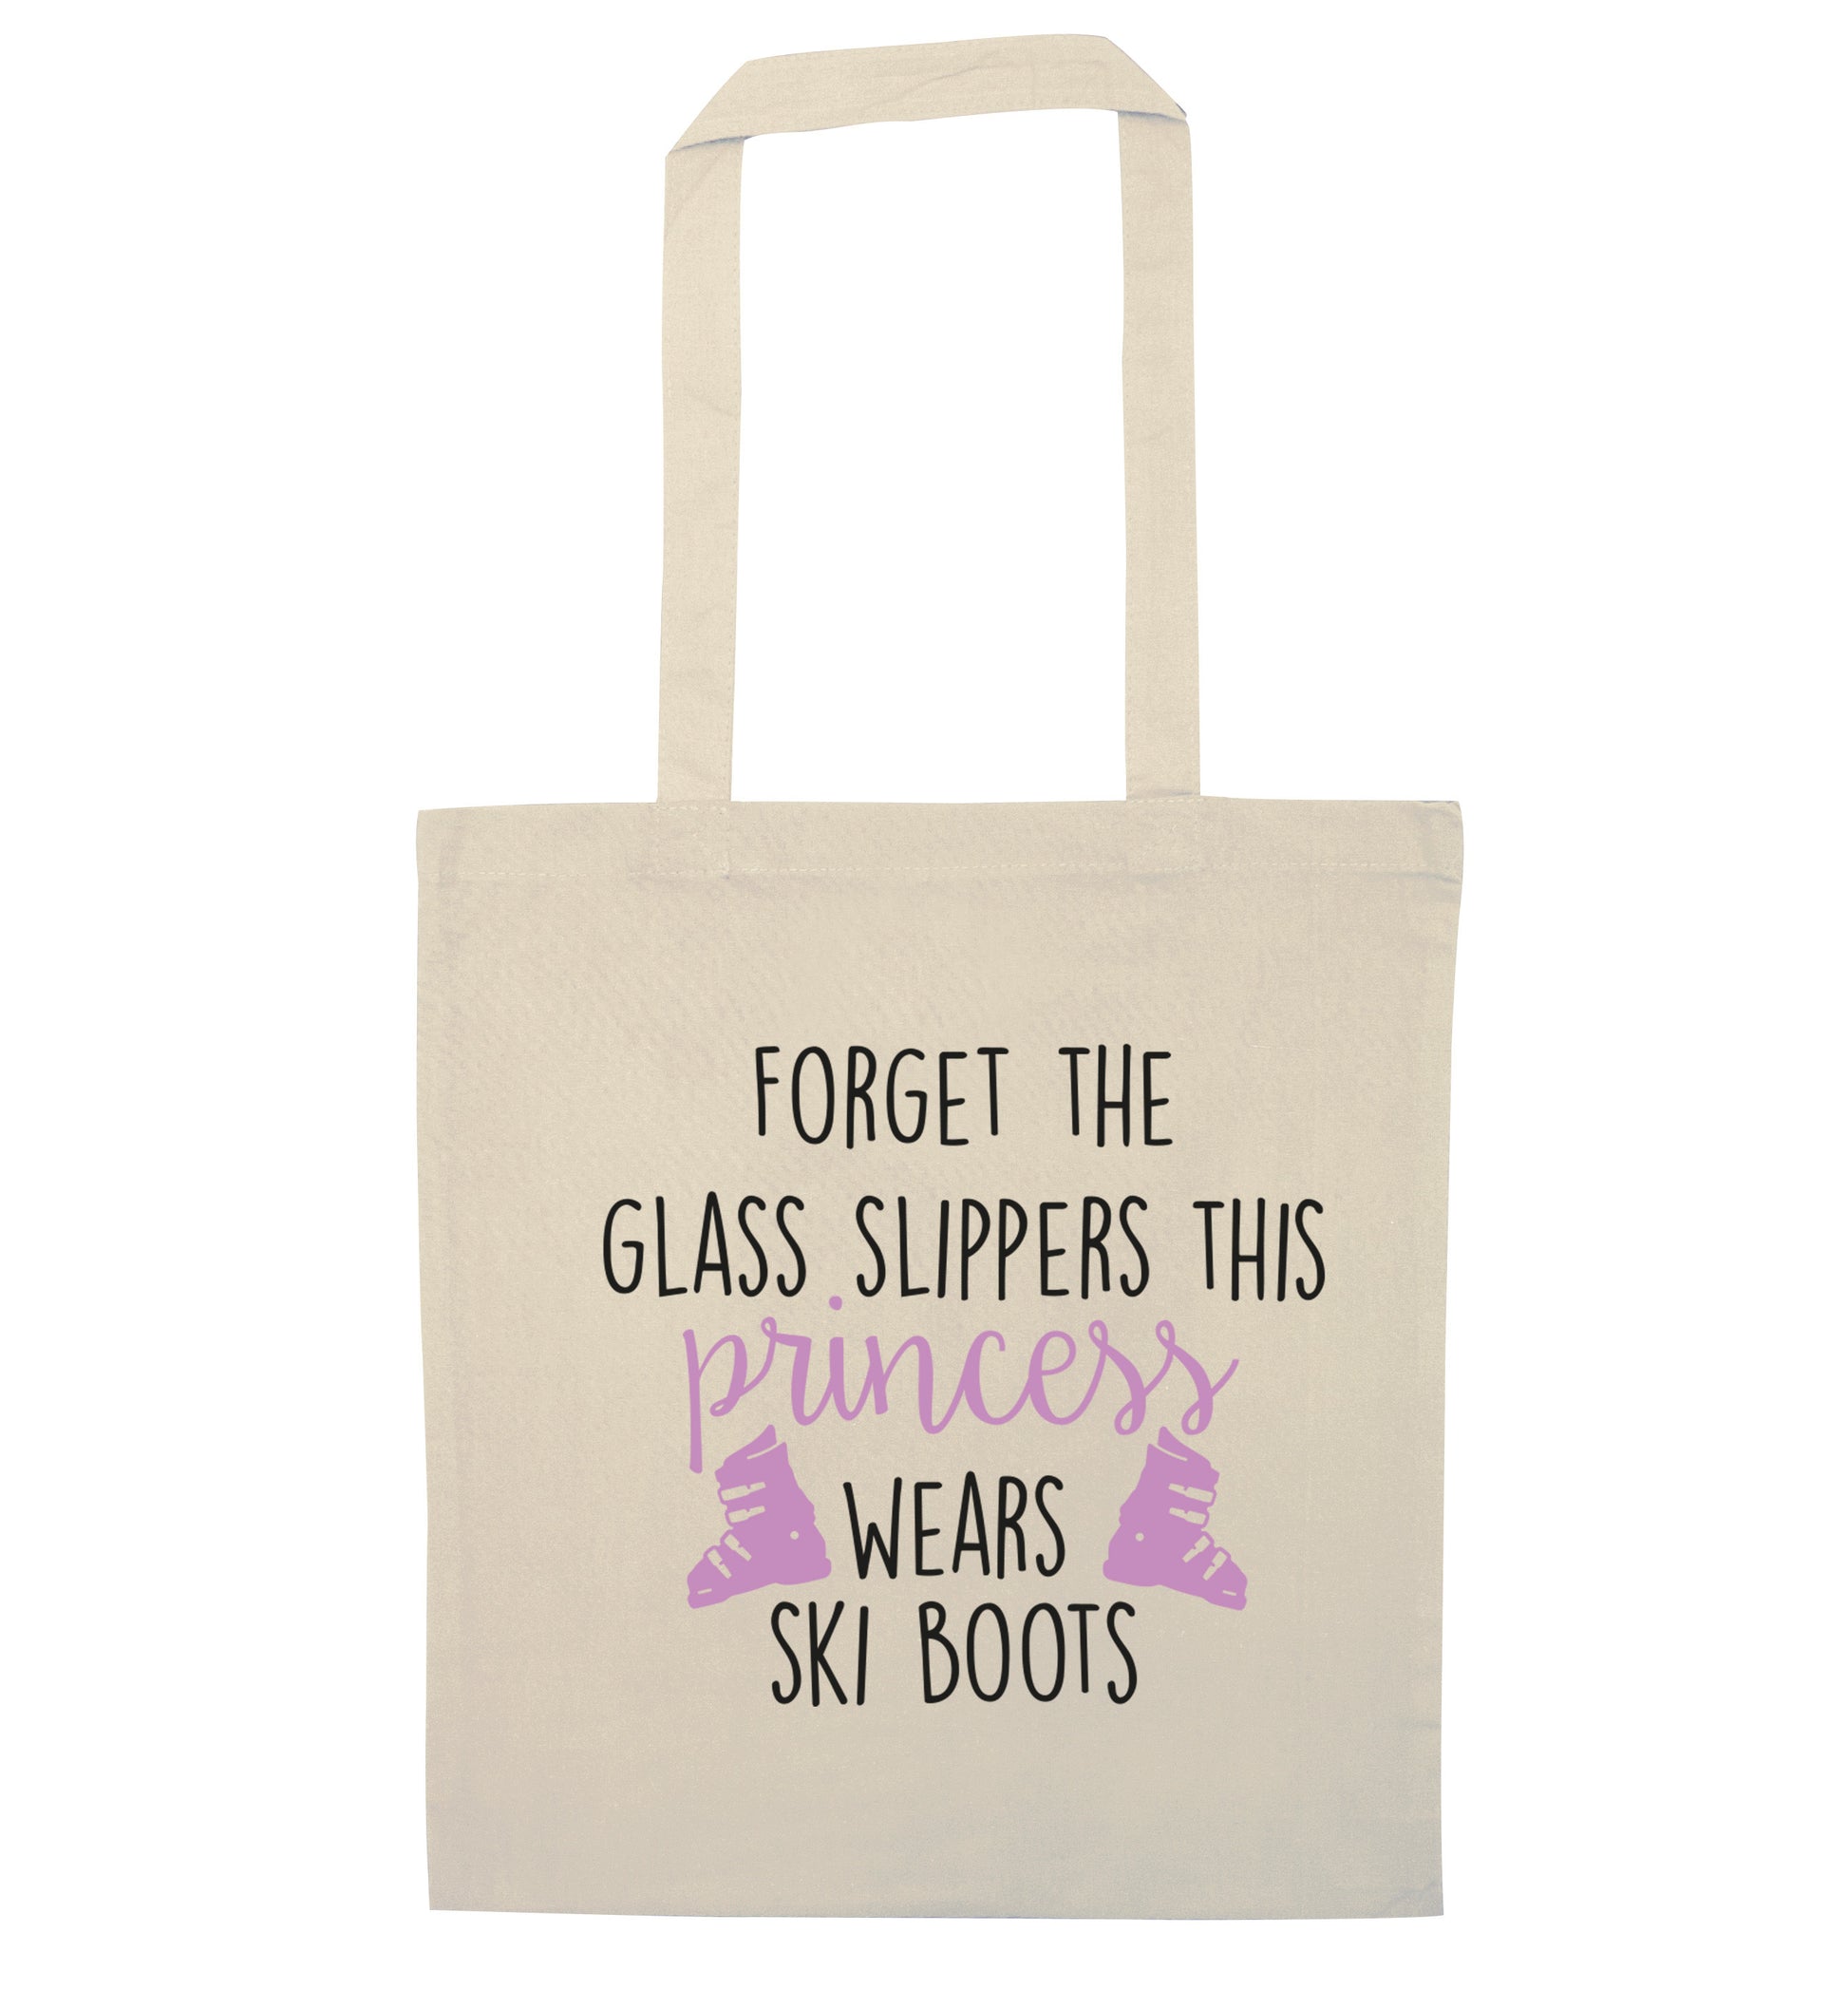 Forget the glass slippers this princess wears ski boots natural tote bag